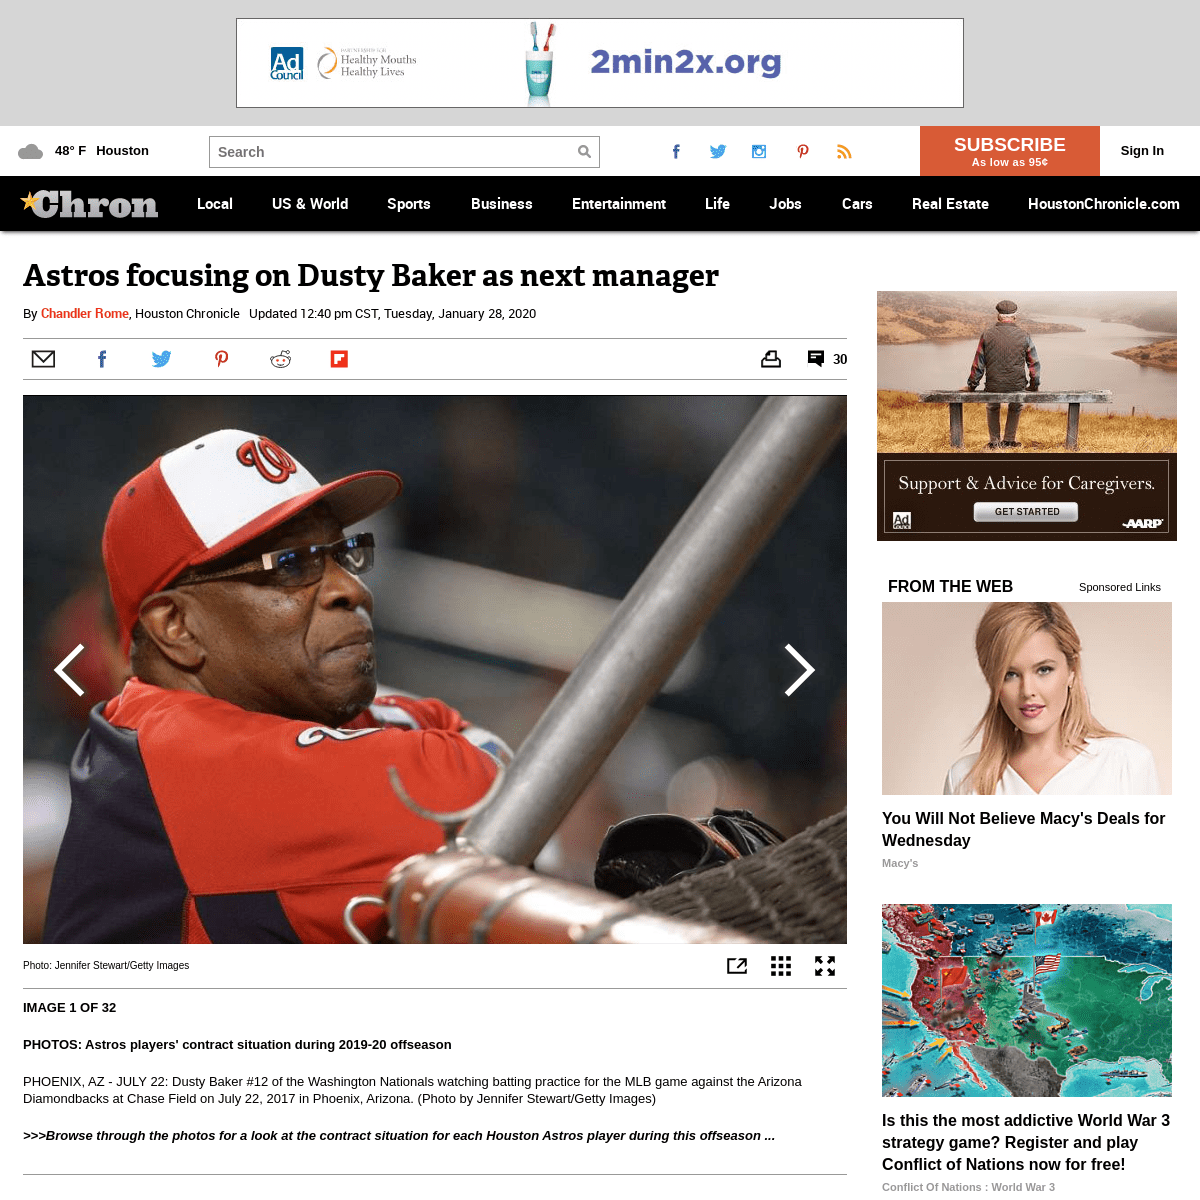 A complete backup of www.chron.com/sports/astros/article/Astros-focusing-Dusty-Baker-next-manager-15010547.php